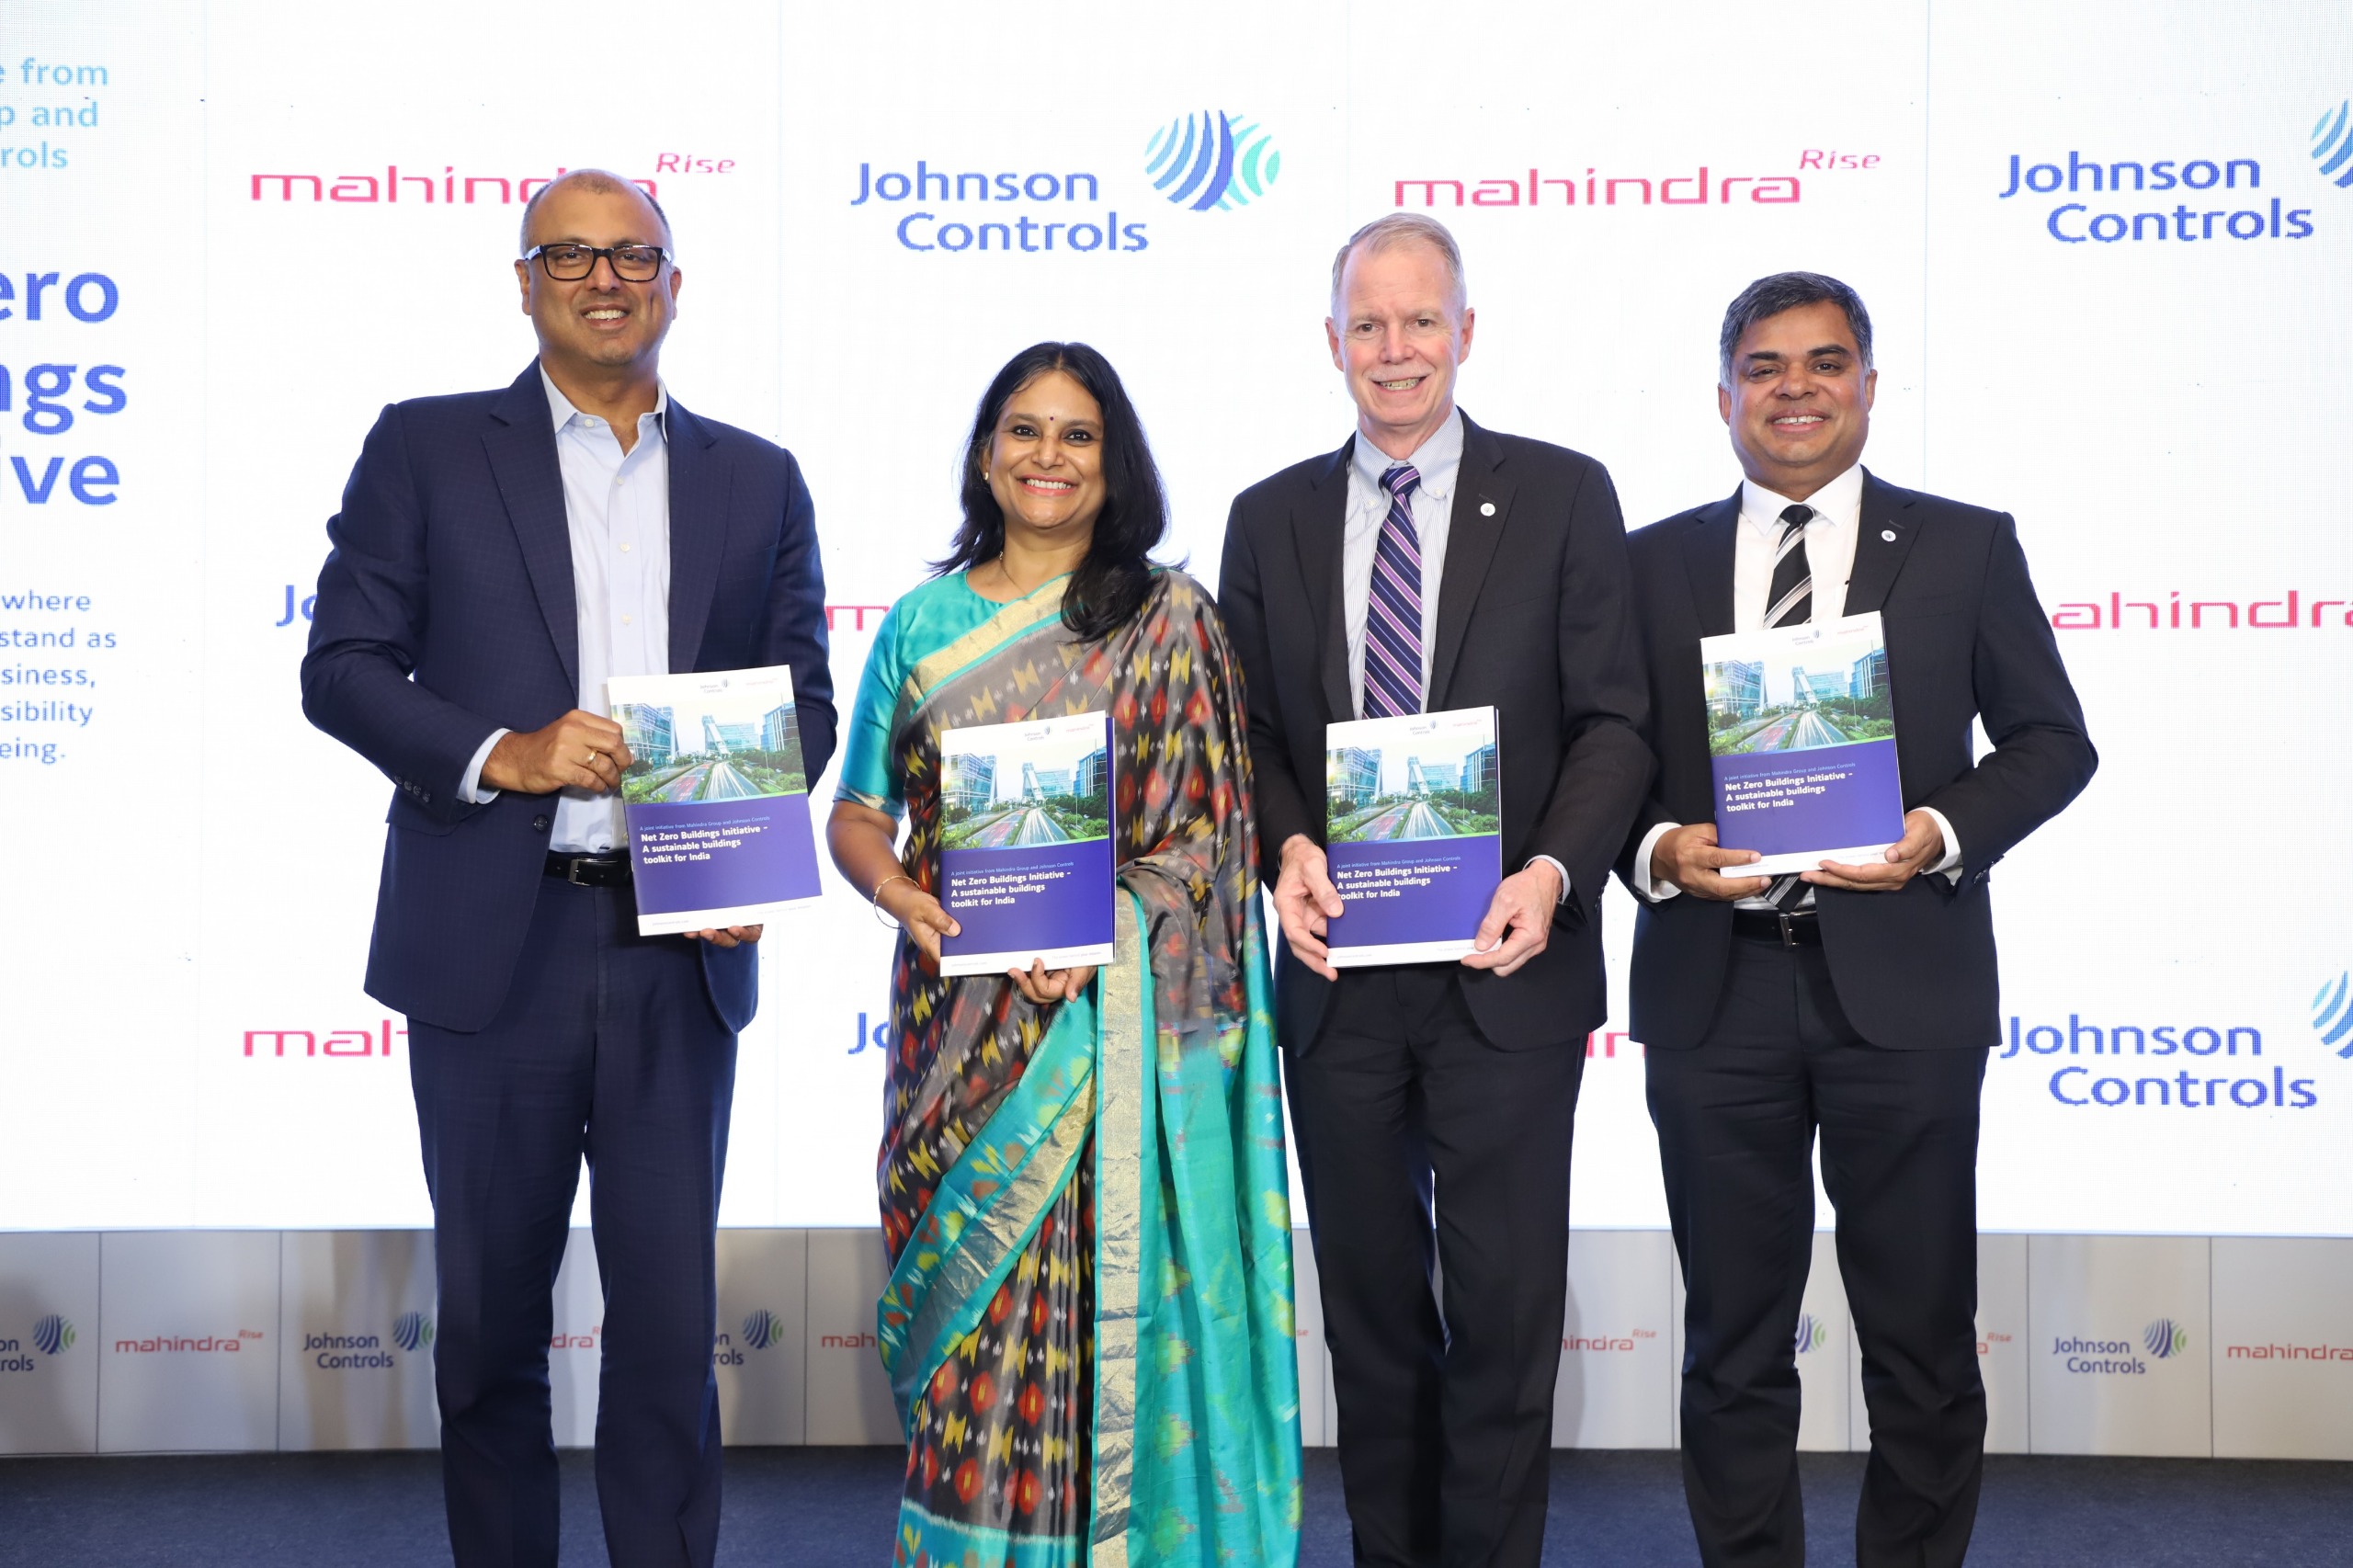 Key dignitaries at the Launch Net Zero Buildings Initiative to Decarbonize Buildings in India